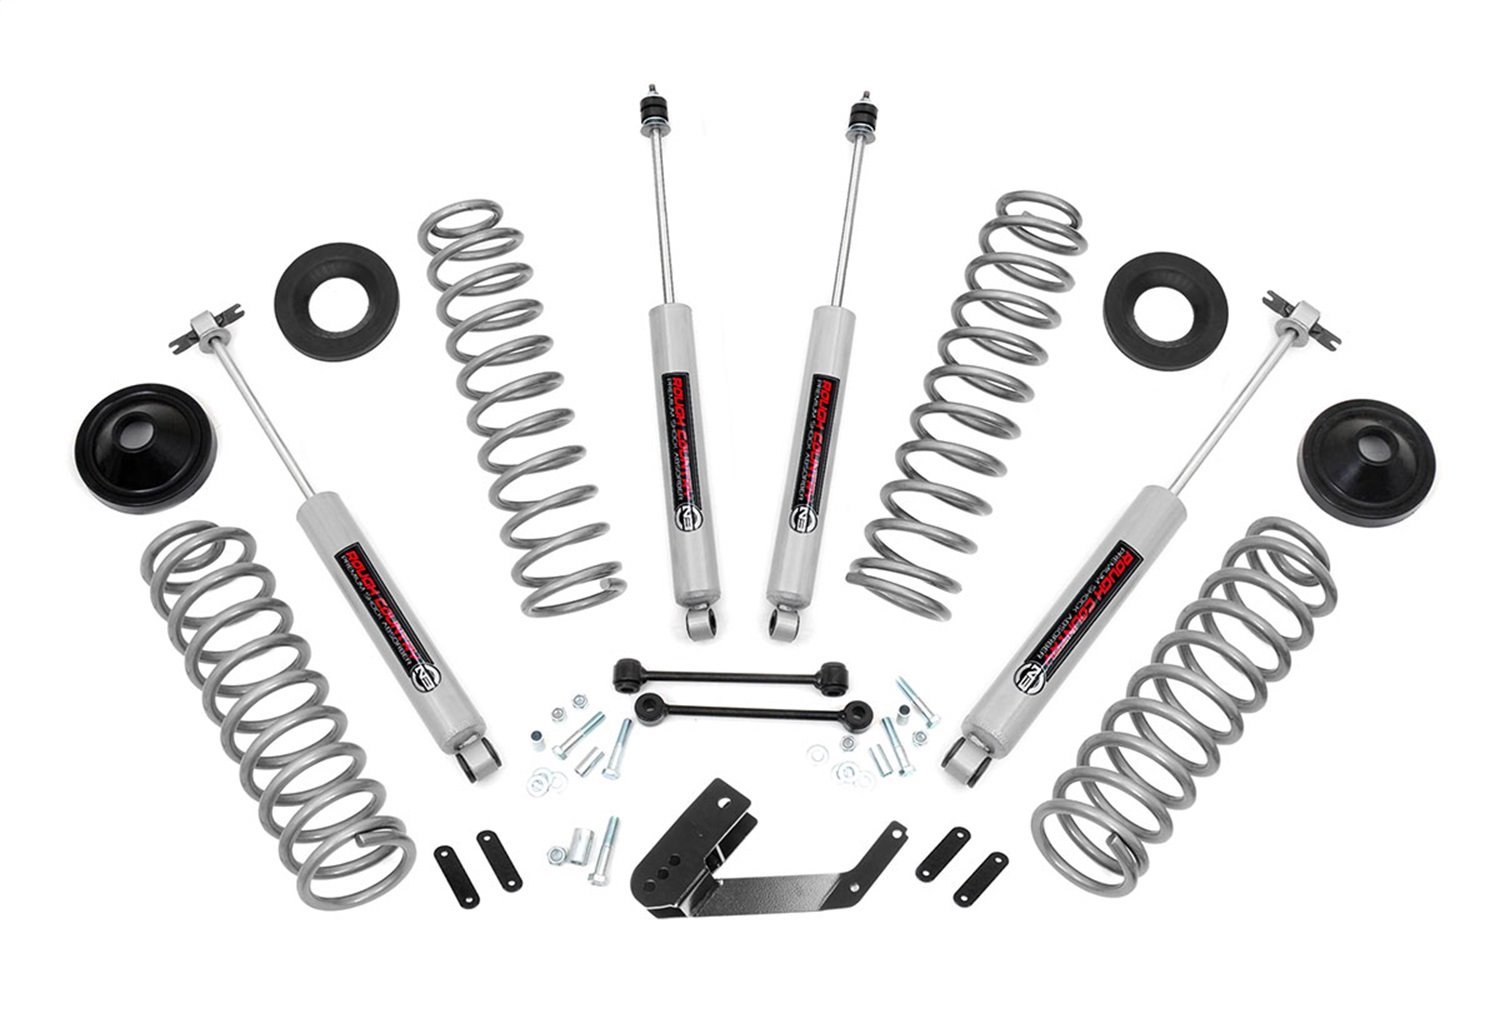 PERF694 Front and Rear Suspension Lift Kit, Lift